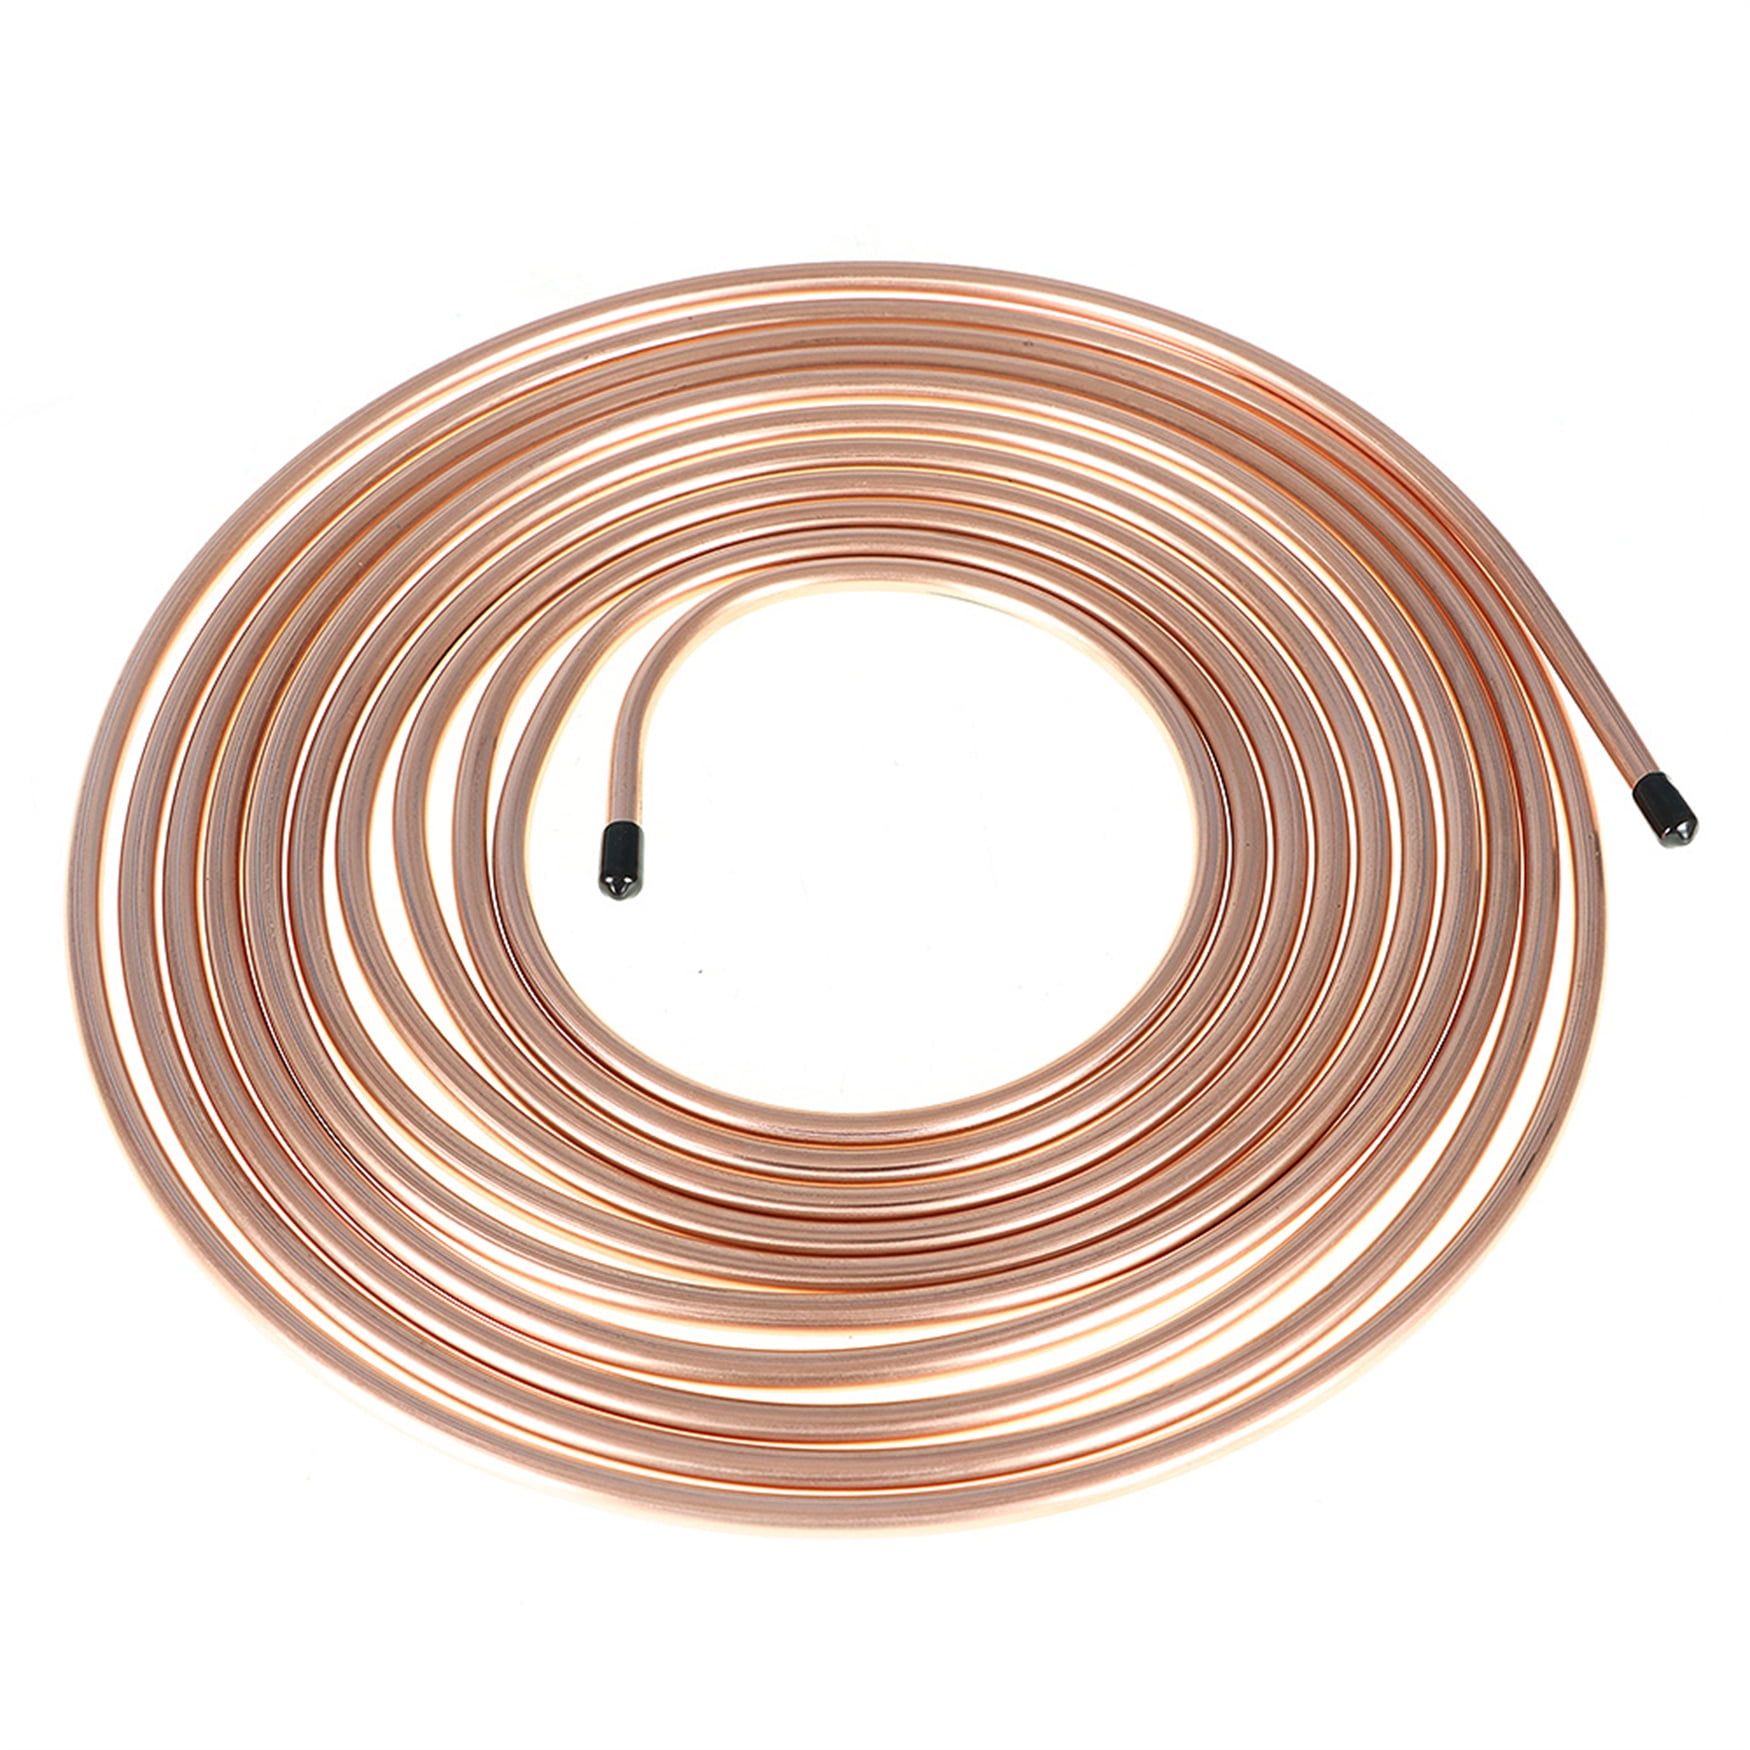 of 3/16 inch Brake Line Copper-Nickel Brake Line Fitting Kit and Flexible Tubing Coil Eastyard 25 Ft for Car Truck Motor Includes 16 Fittings 